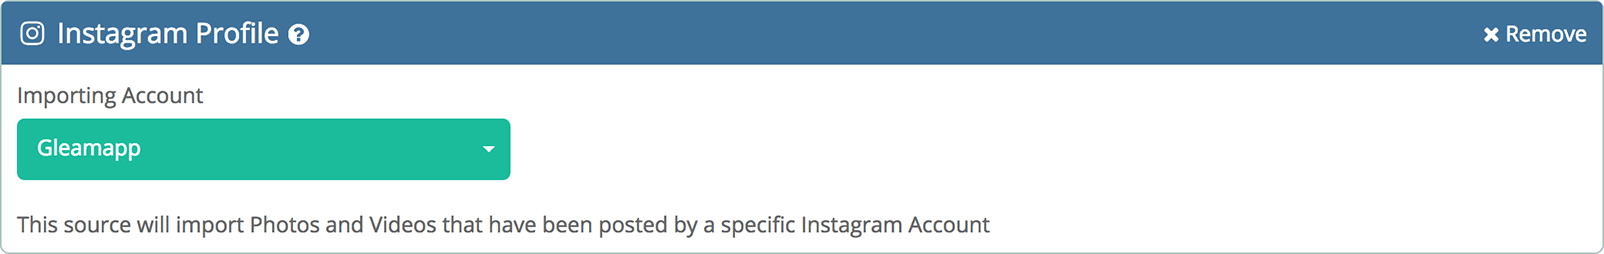 Gleam interface showing linked Instagram account for importing data